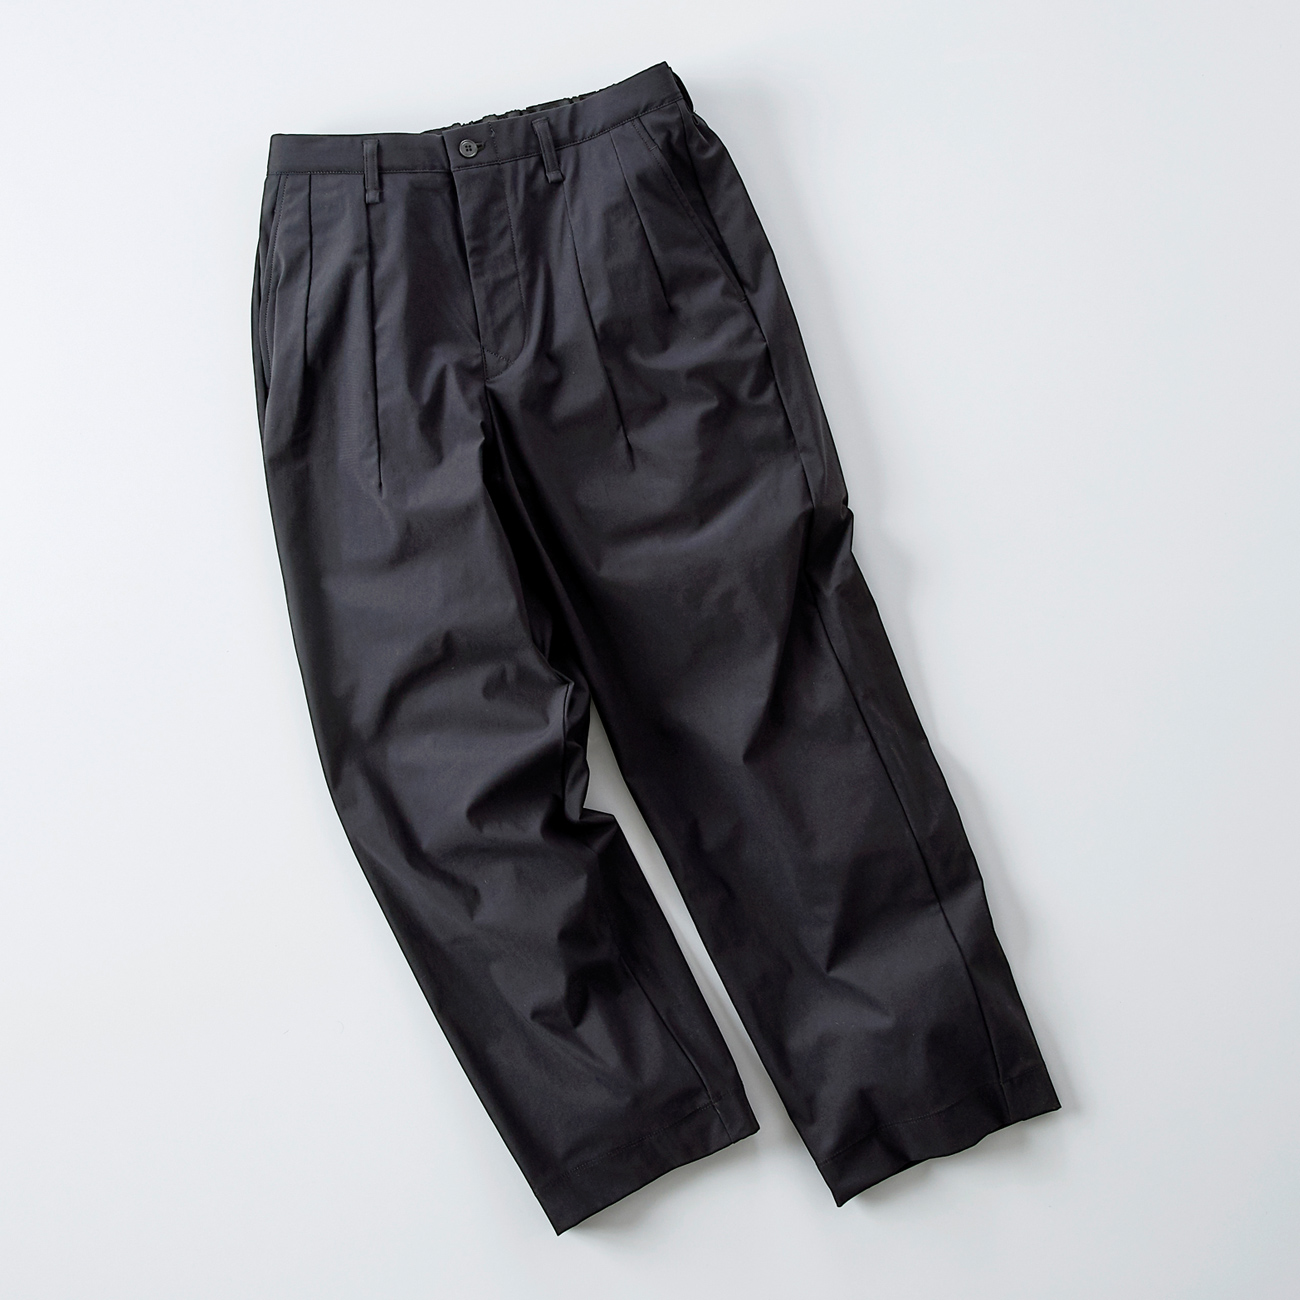 ADVANCE WIDE TROUSERS